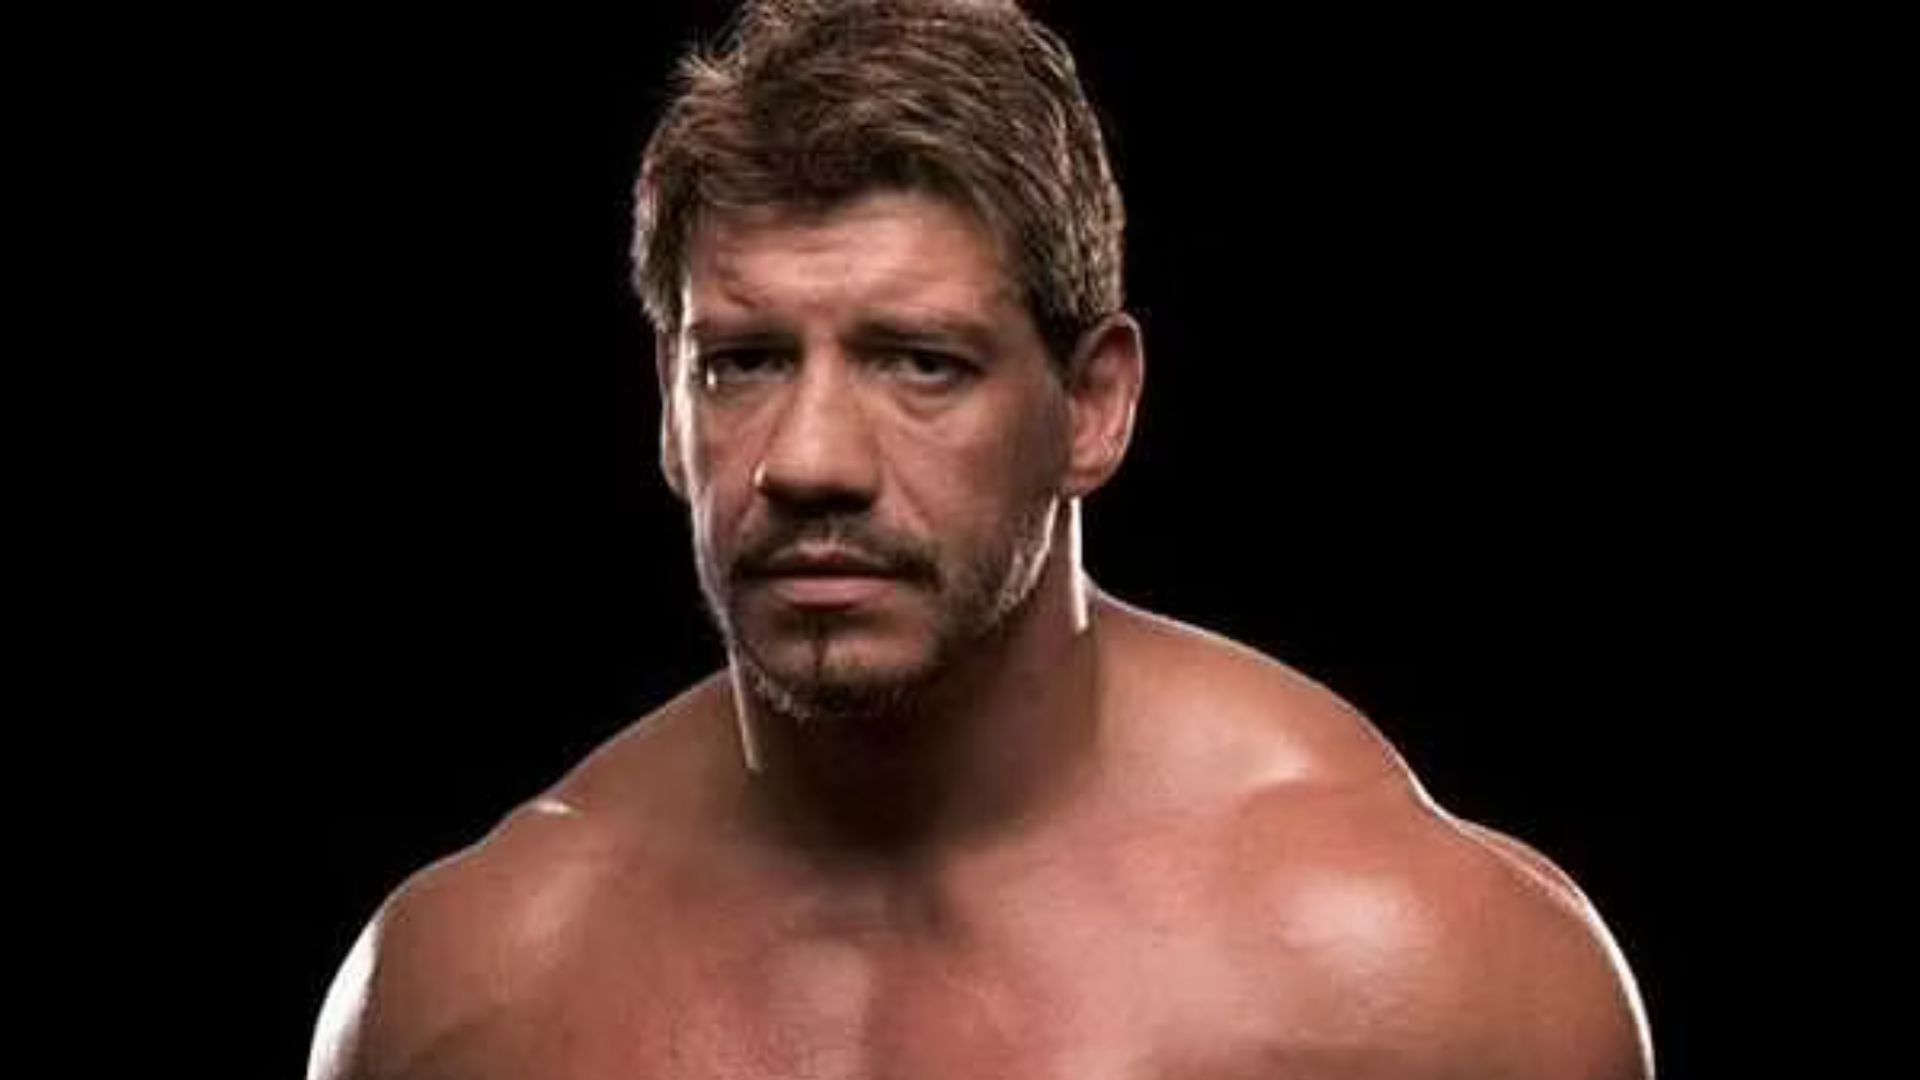 Eddie Guerrero triumphed over tragedy before his untimely death